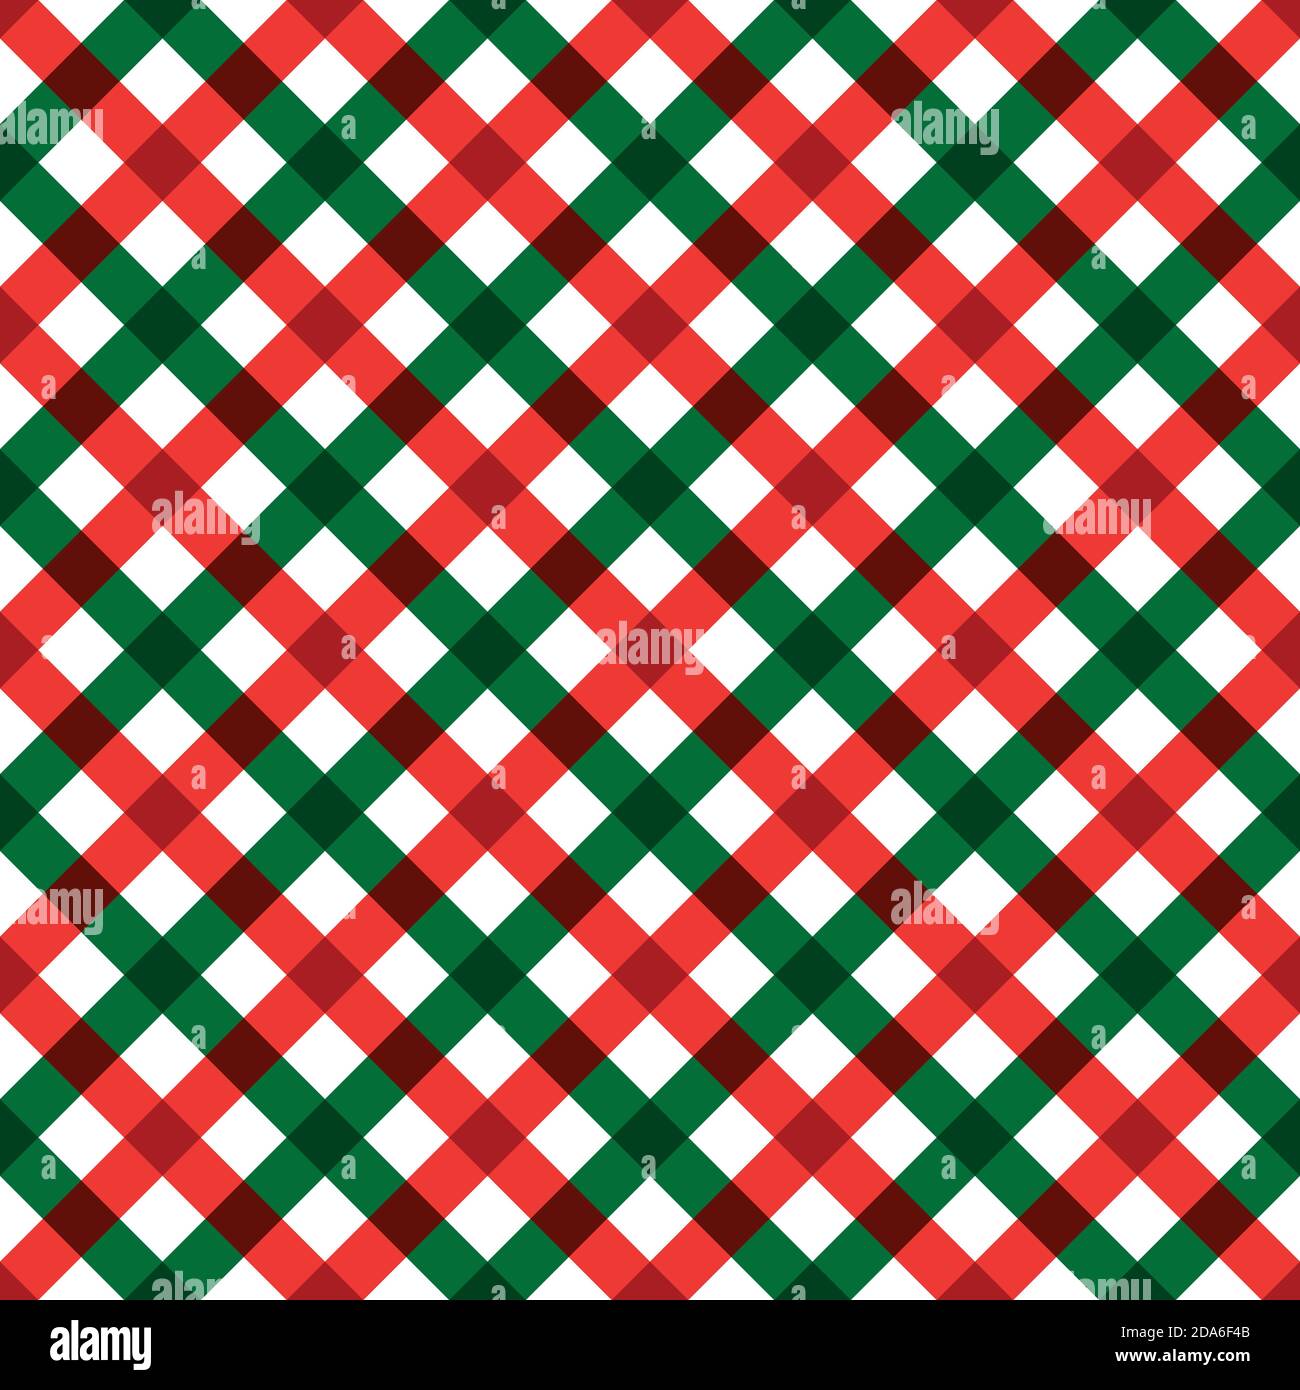 Christmas and new year tartan plaid. pattern in red and green cage. Vector illustration. pattern in Christmas colors, diagonal Stock Vector